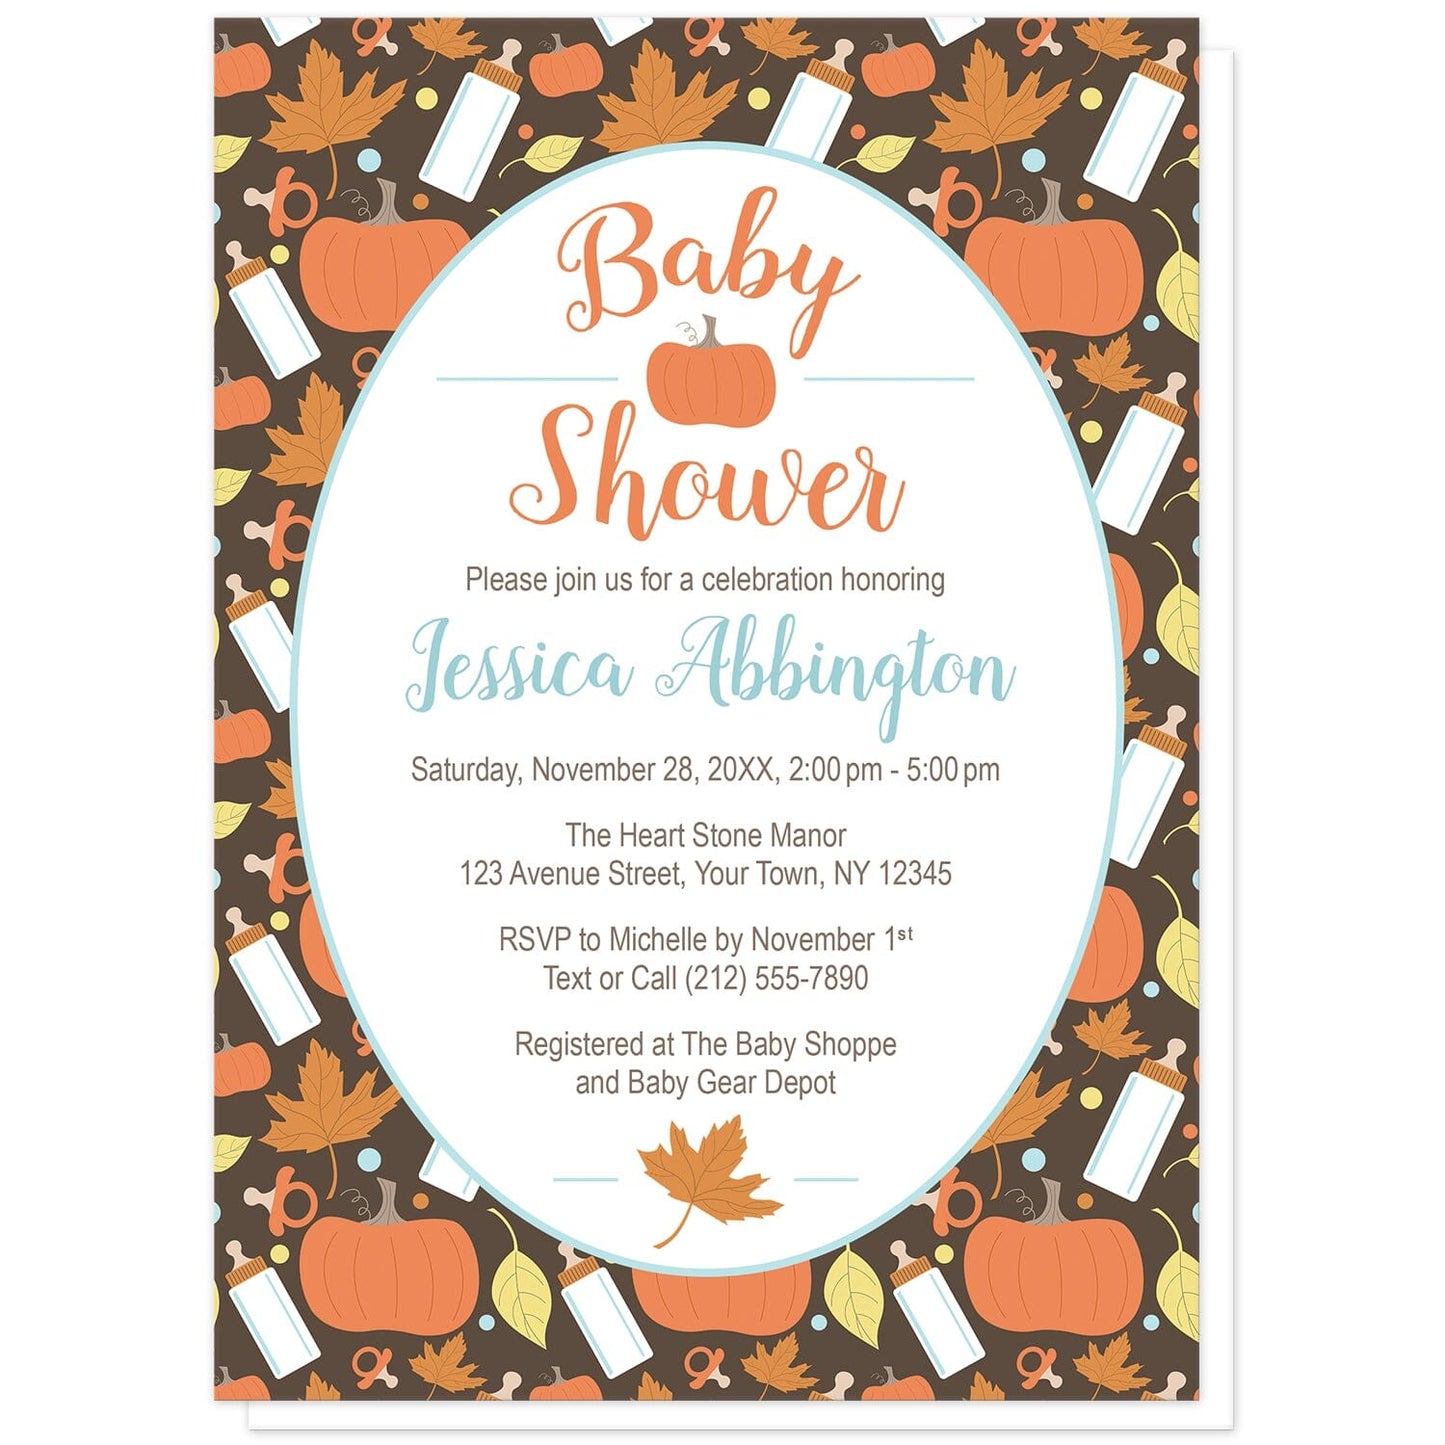 Autumn Baby Pumpkin Pattern Baby Shower Invitations at Artistically Invited. Autumn baby pumpkin pattern baby shower invitations with a cute pattern mixing fall pumpkins and leaves with baby bottles and pacifiers. Your personalized autumn baby shower invitation details are custom printed in orange, light teal, and brown in a white oval over this adorable illustrated fall baby pattern background.